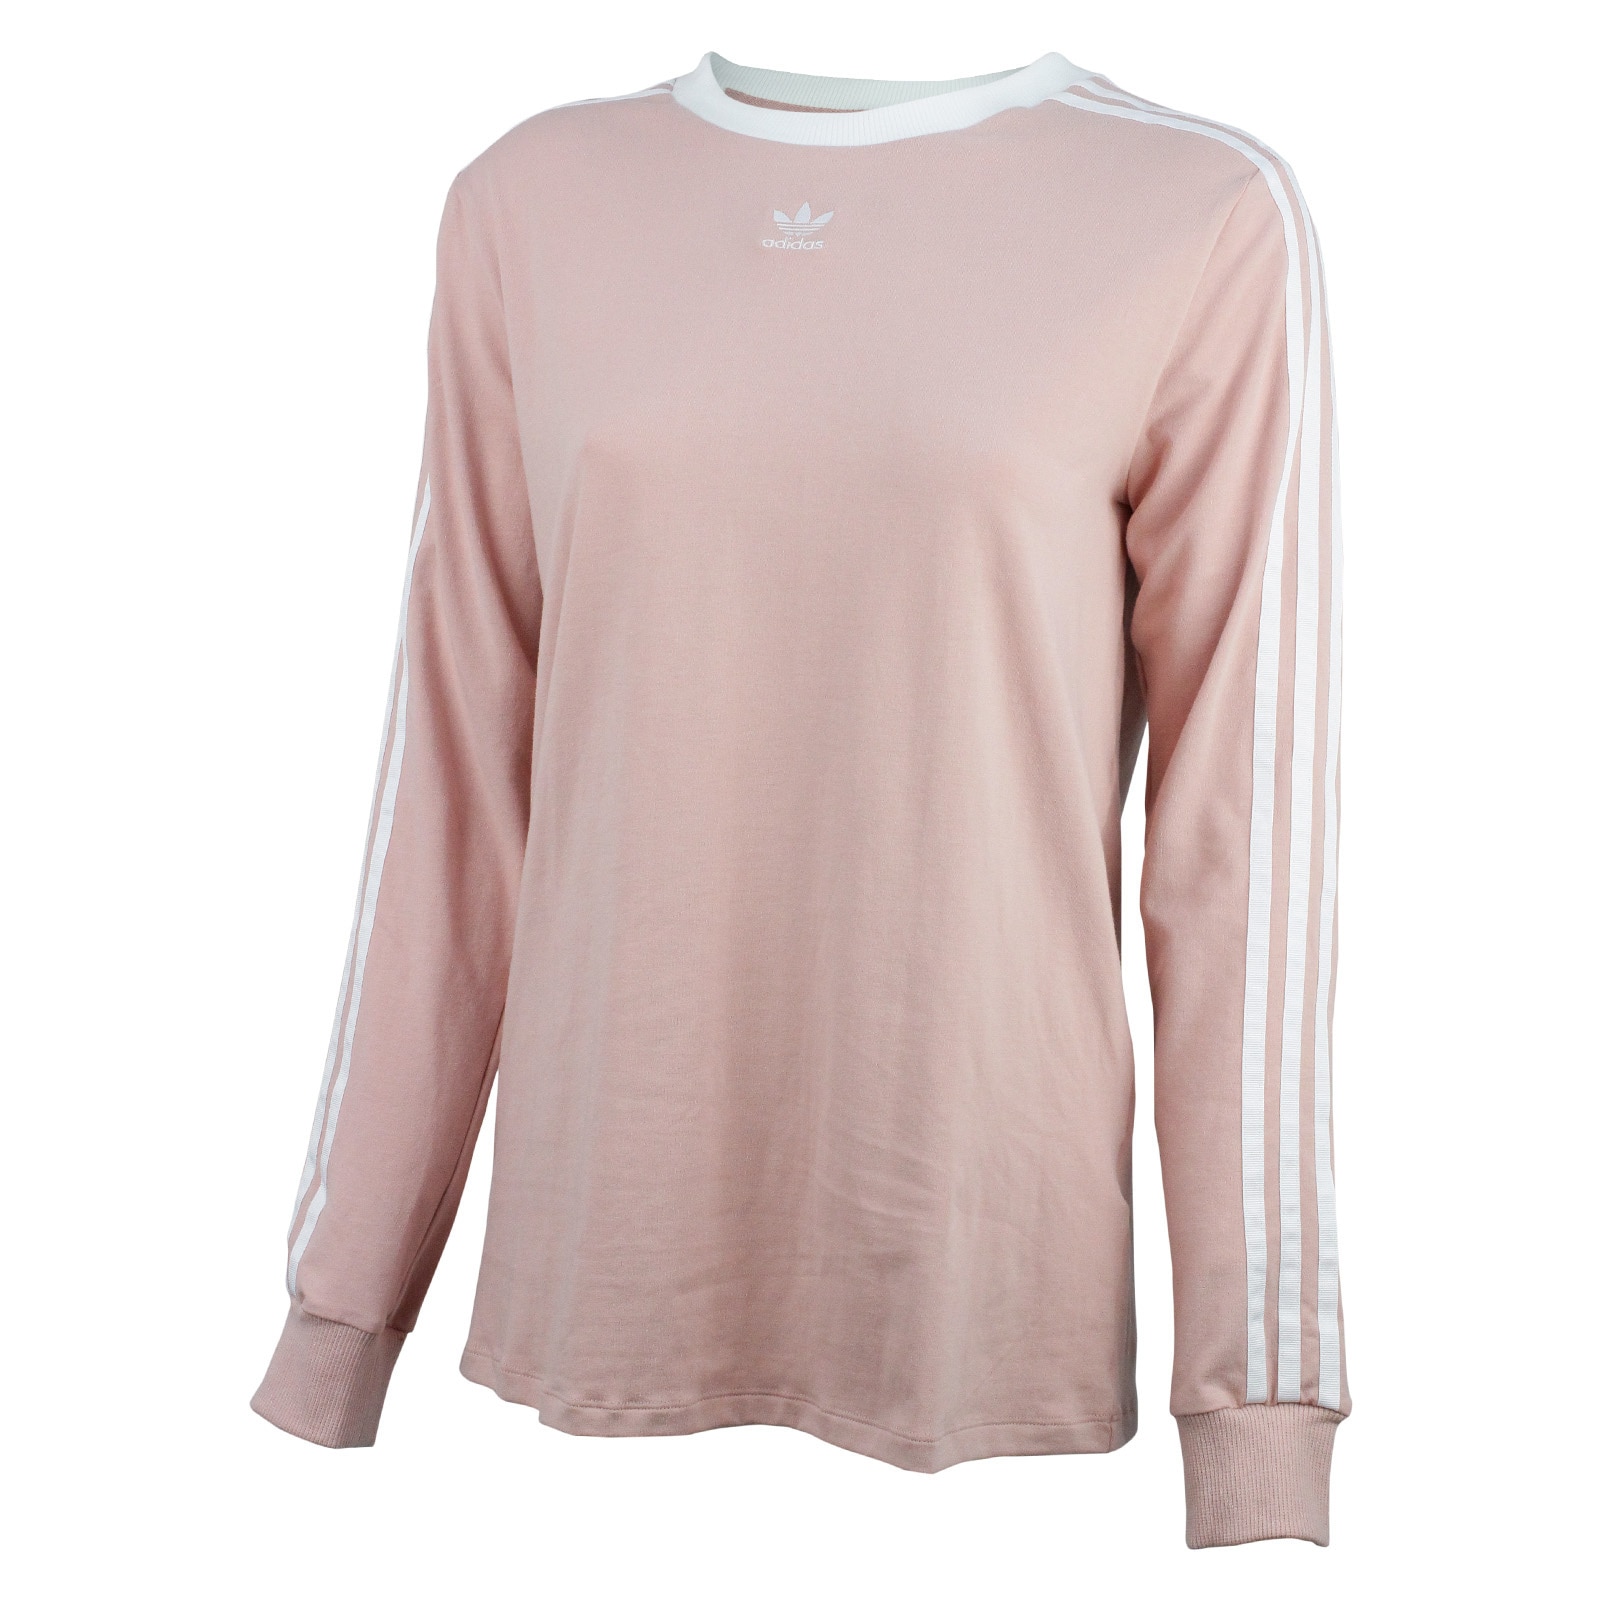 Therapy run out tactics Bluza femei adidas Originals 3 Stripes LS DH4431, XL, Roz - eMAG.ro